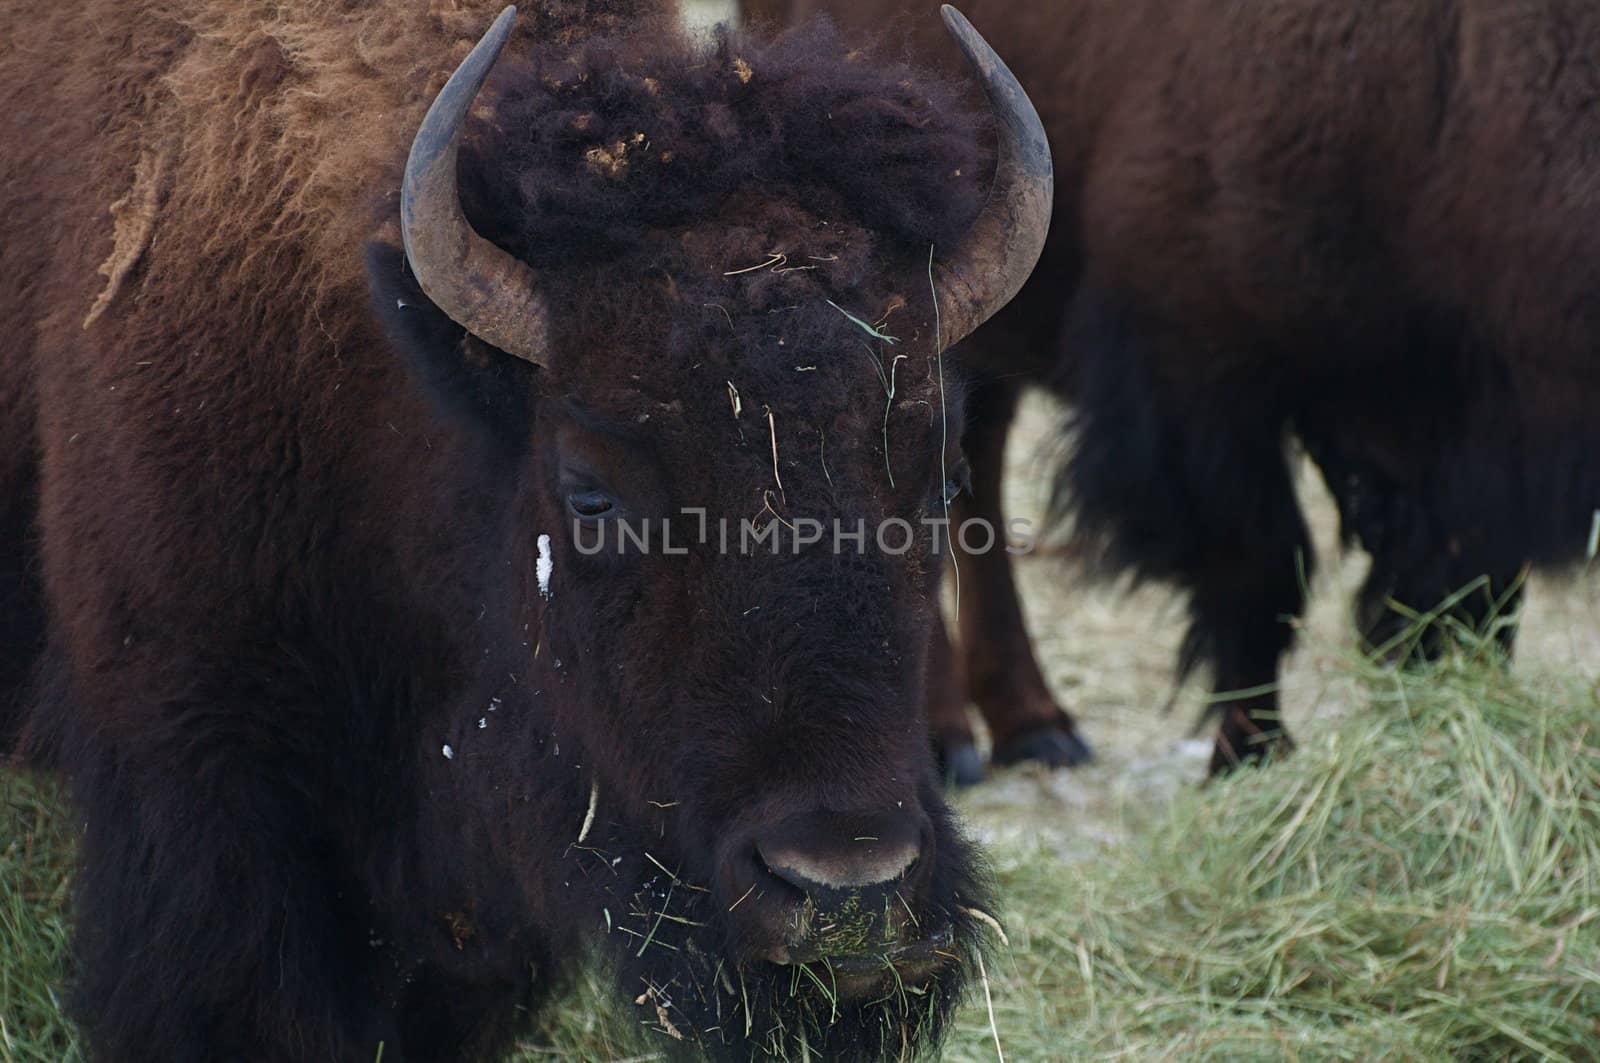 A large buffalo looks around while eating hay and grass.